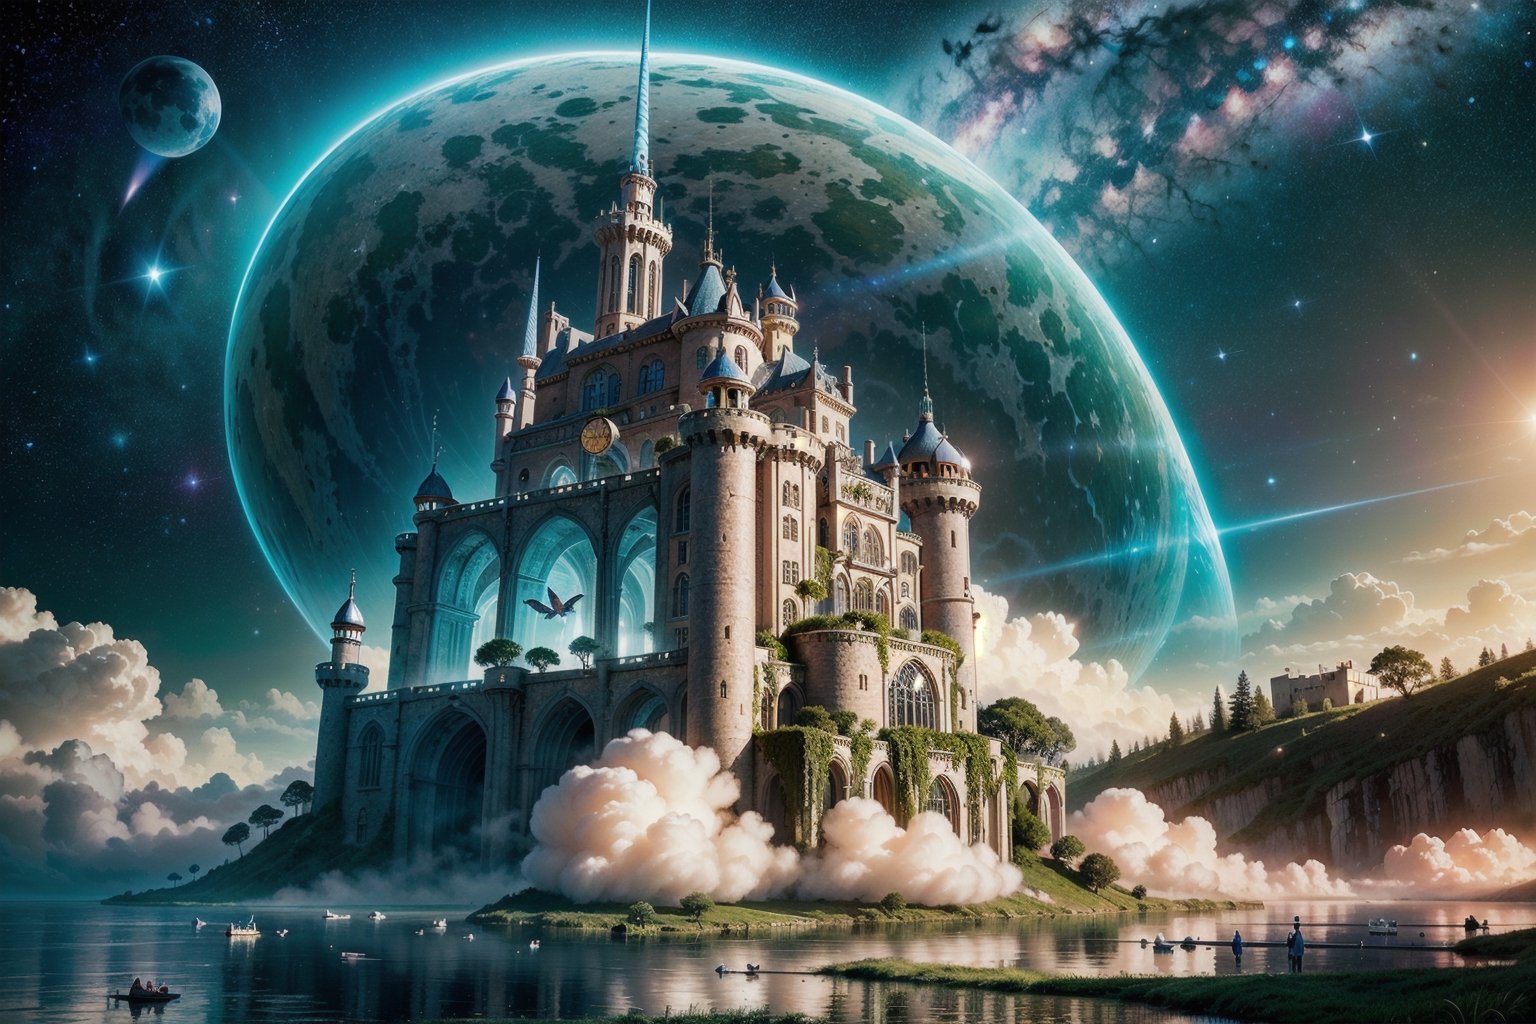 photorealistic photography in high definition, of a mystical fantasy scene, of a luxurious castle in the shape of dragon wings, with flowers and butterflies, and a magical lake surrounded by mushrooms, and a unicorn, inspired by Alice in Wonderland , as if it were a fairy tale, with Interstellar Space visible in the sky.